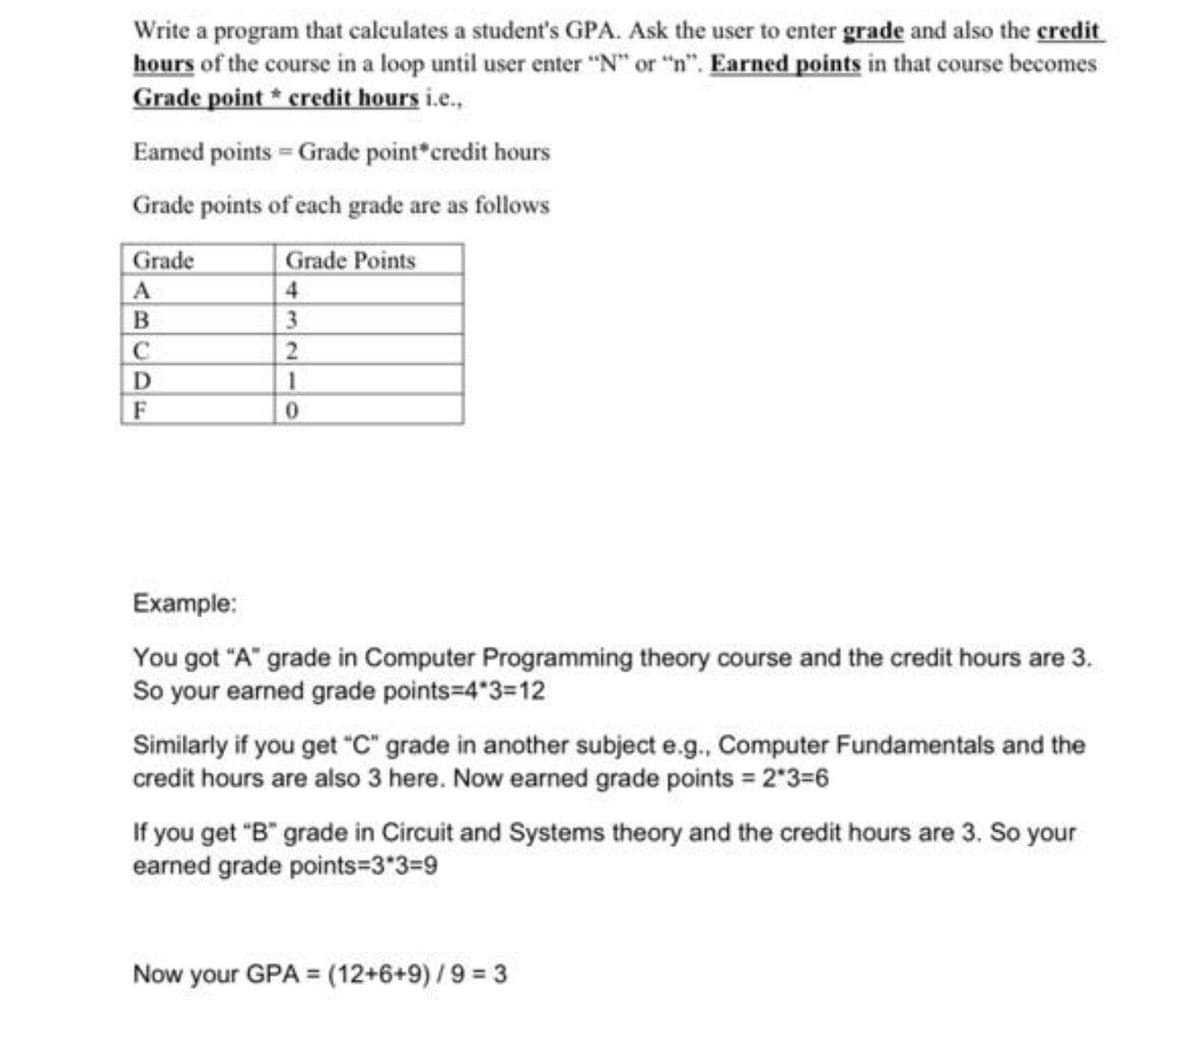 Write a program that calculates a student's GPA. Ask the user to enter grade and also the credit
hours of the course in a loop until user enter "N" or "n". Earned points in that course becomes
Grade point * credit hours i.e.,
Eamed points Grade point credit hours
Grade points of each grade are as follows
Grade Points
4
3.
2
Grade
B
C
Example:
You got "A" grade in Computer Programming theory course and the credit hours are 3.
So your earned grade points-4 3=12
Similarly if you get "C" grade in another subject e.g., Computer Fundamentals and the
credit hours are also 3 here. Now earned grade points = 2*3=6
If you get "B" grade in Circuit and Systems theory and the credit hours are 3. So your
earned grade points=3"3=9
Now your GPA = (12+6+9) /9 = 3
